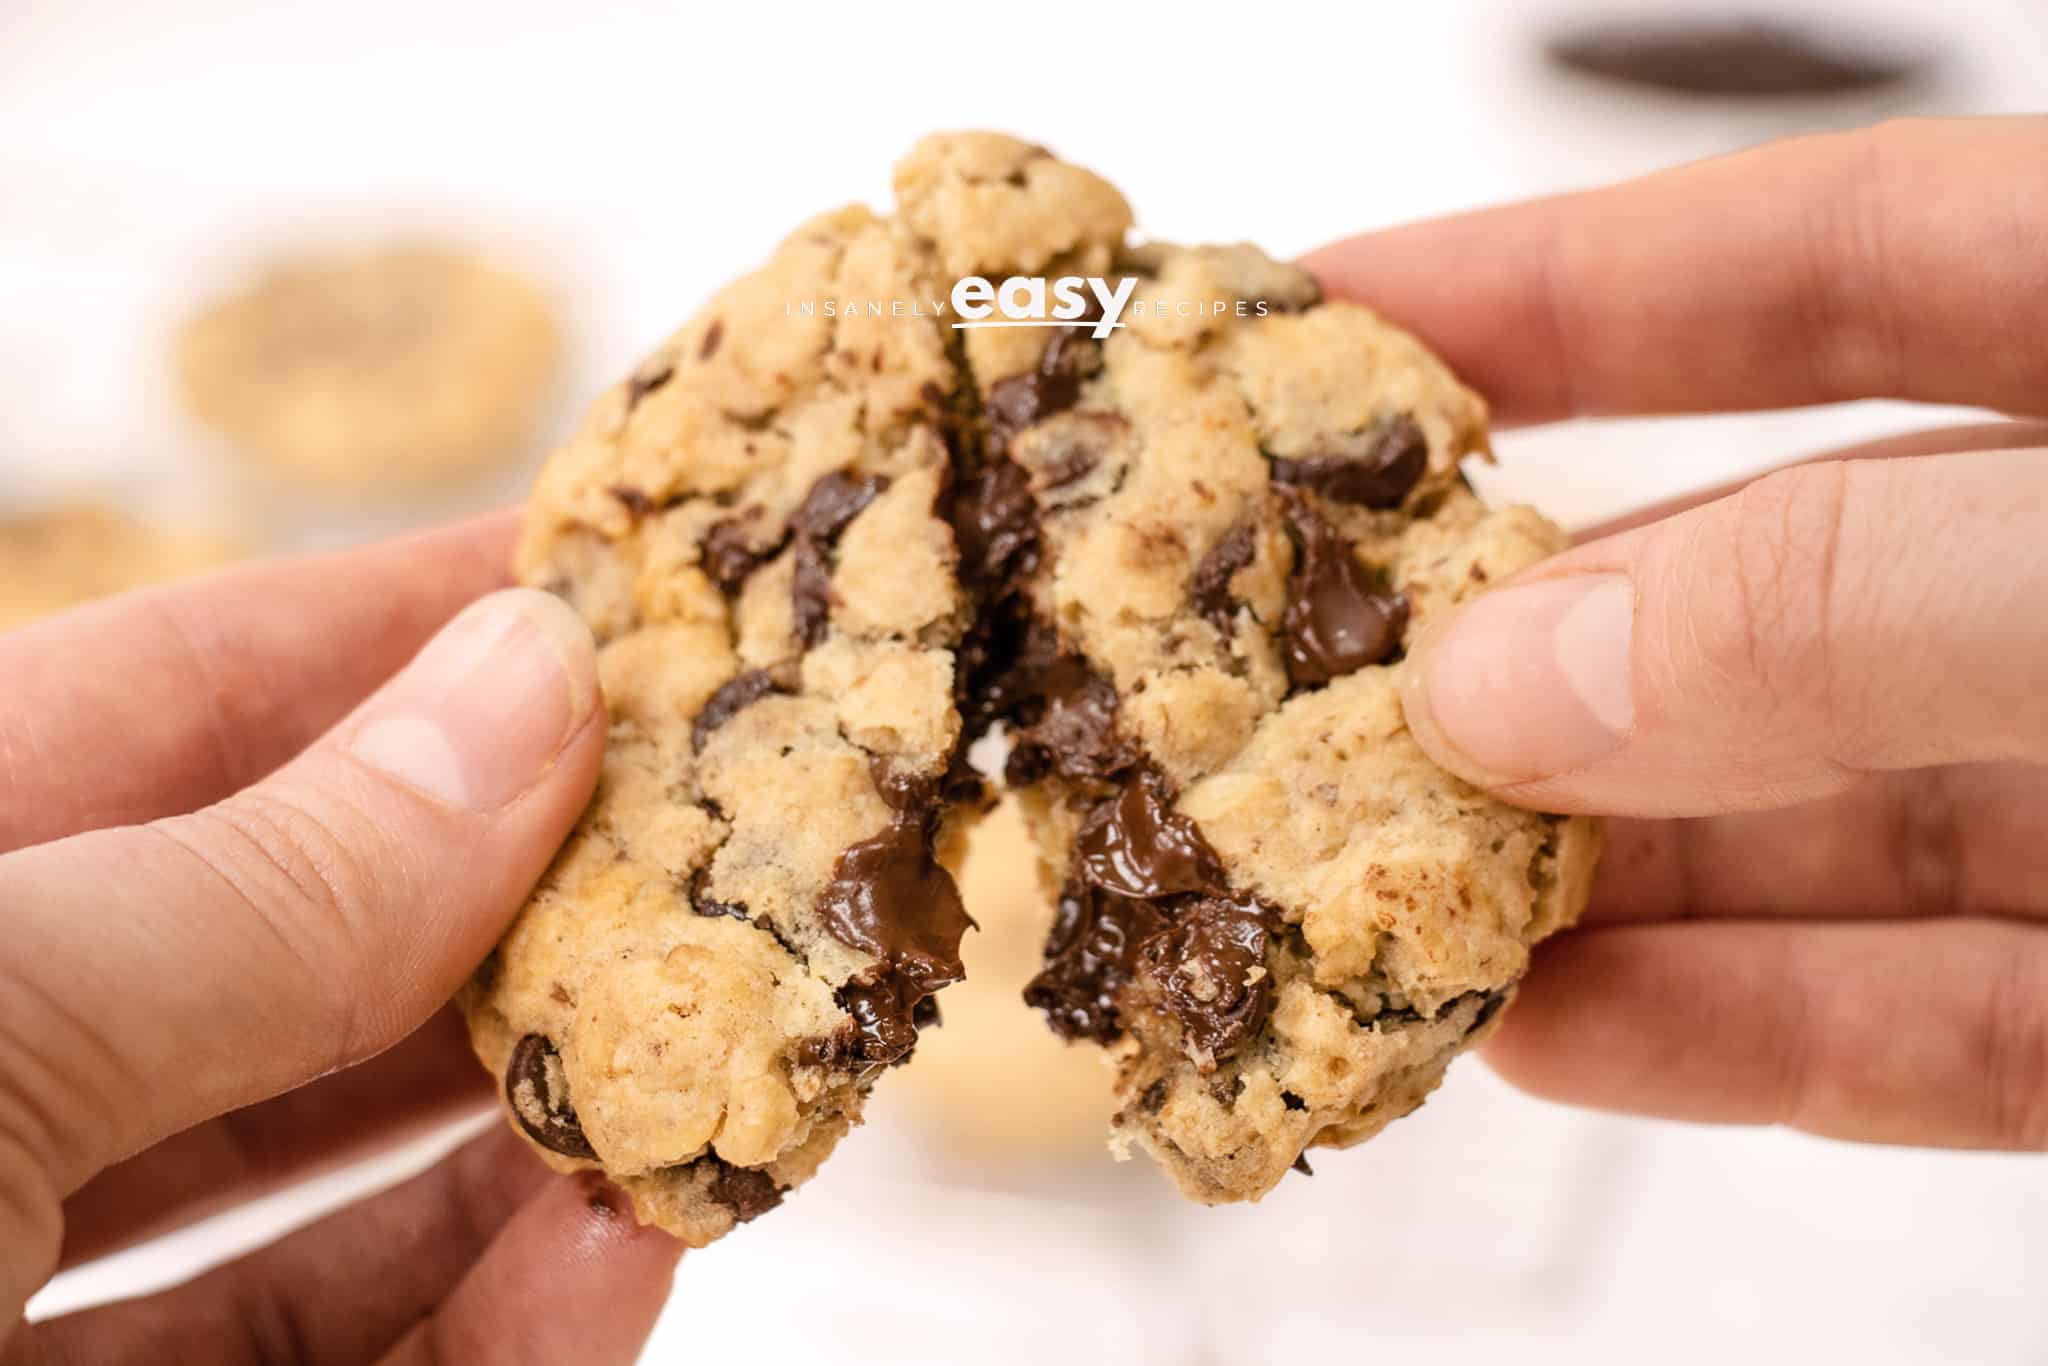 Photo of a hand breaking a Vegan Oatmeal Chocolate Chip Cookie in two pieces, showing the yummy soft inside.